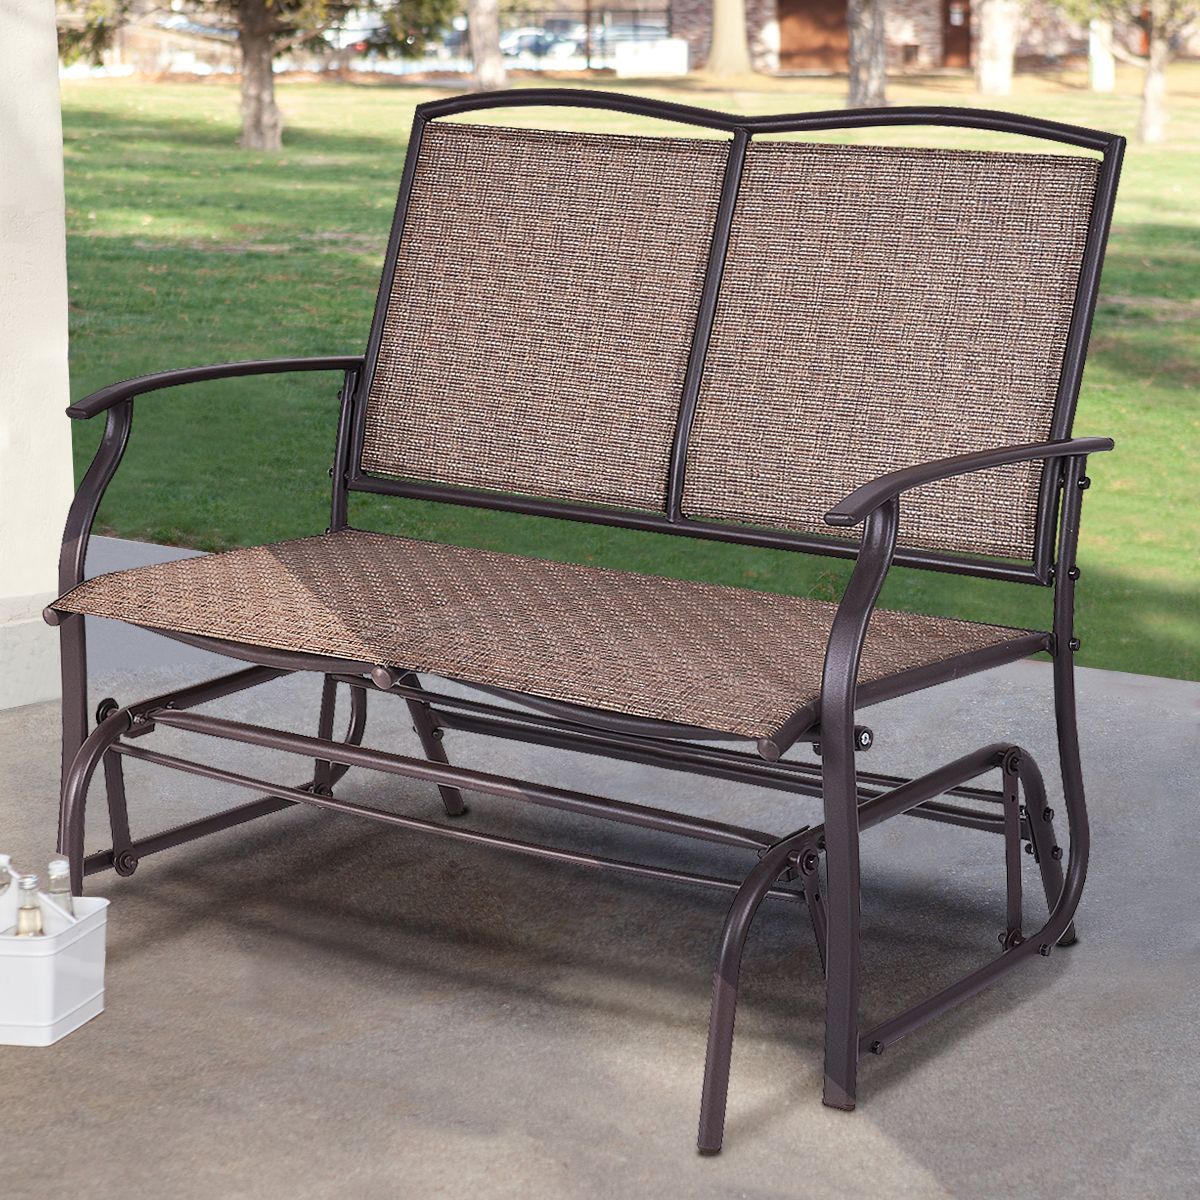 Costway Patio Glider Rocking Bench Double 2 Person Chair Loveseat Armchair  Backyard – Walmart Regarding Latest Indoor/outdoor Double Glider Benches (View 11 of 30)